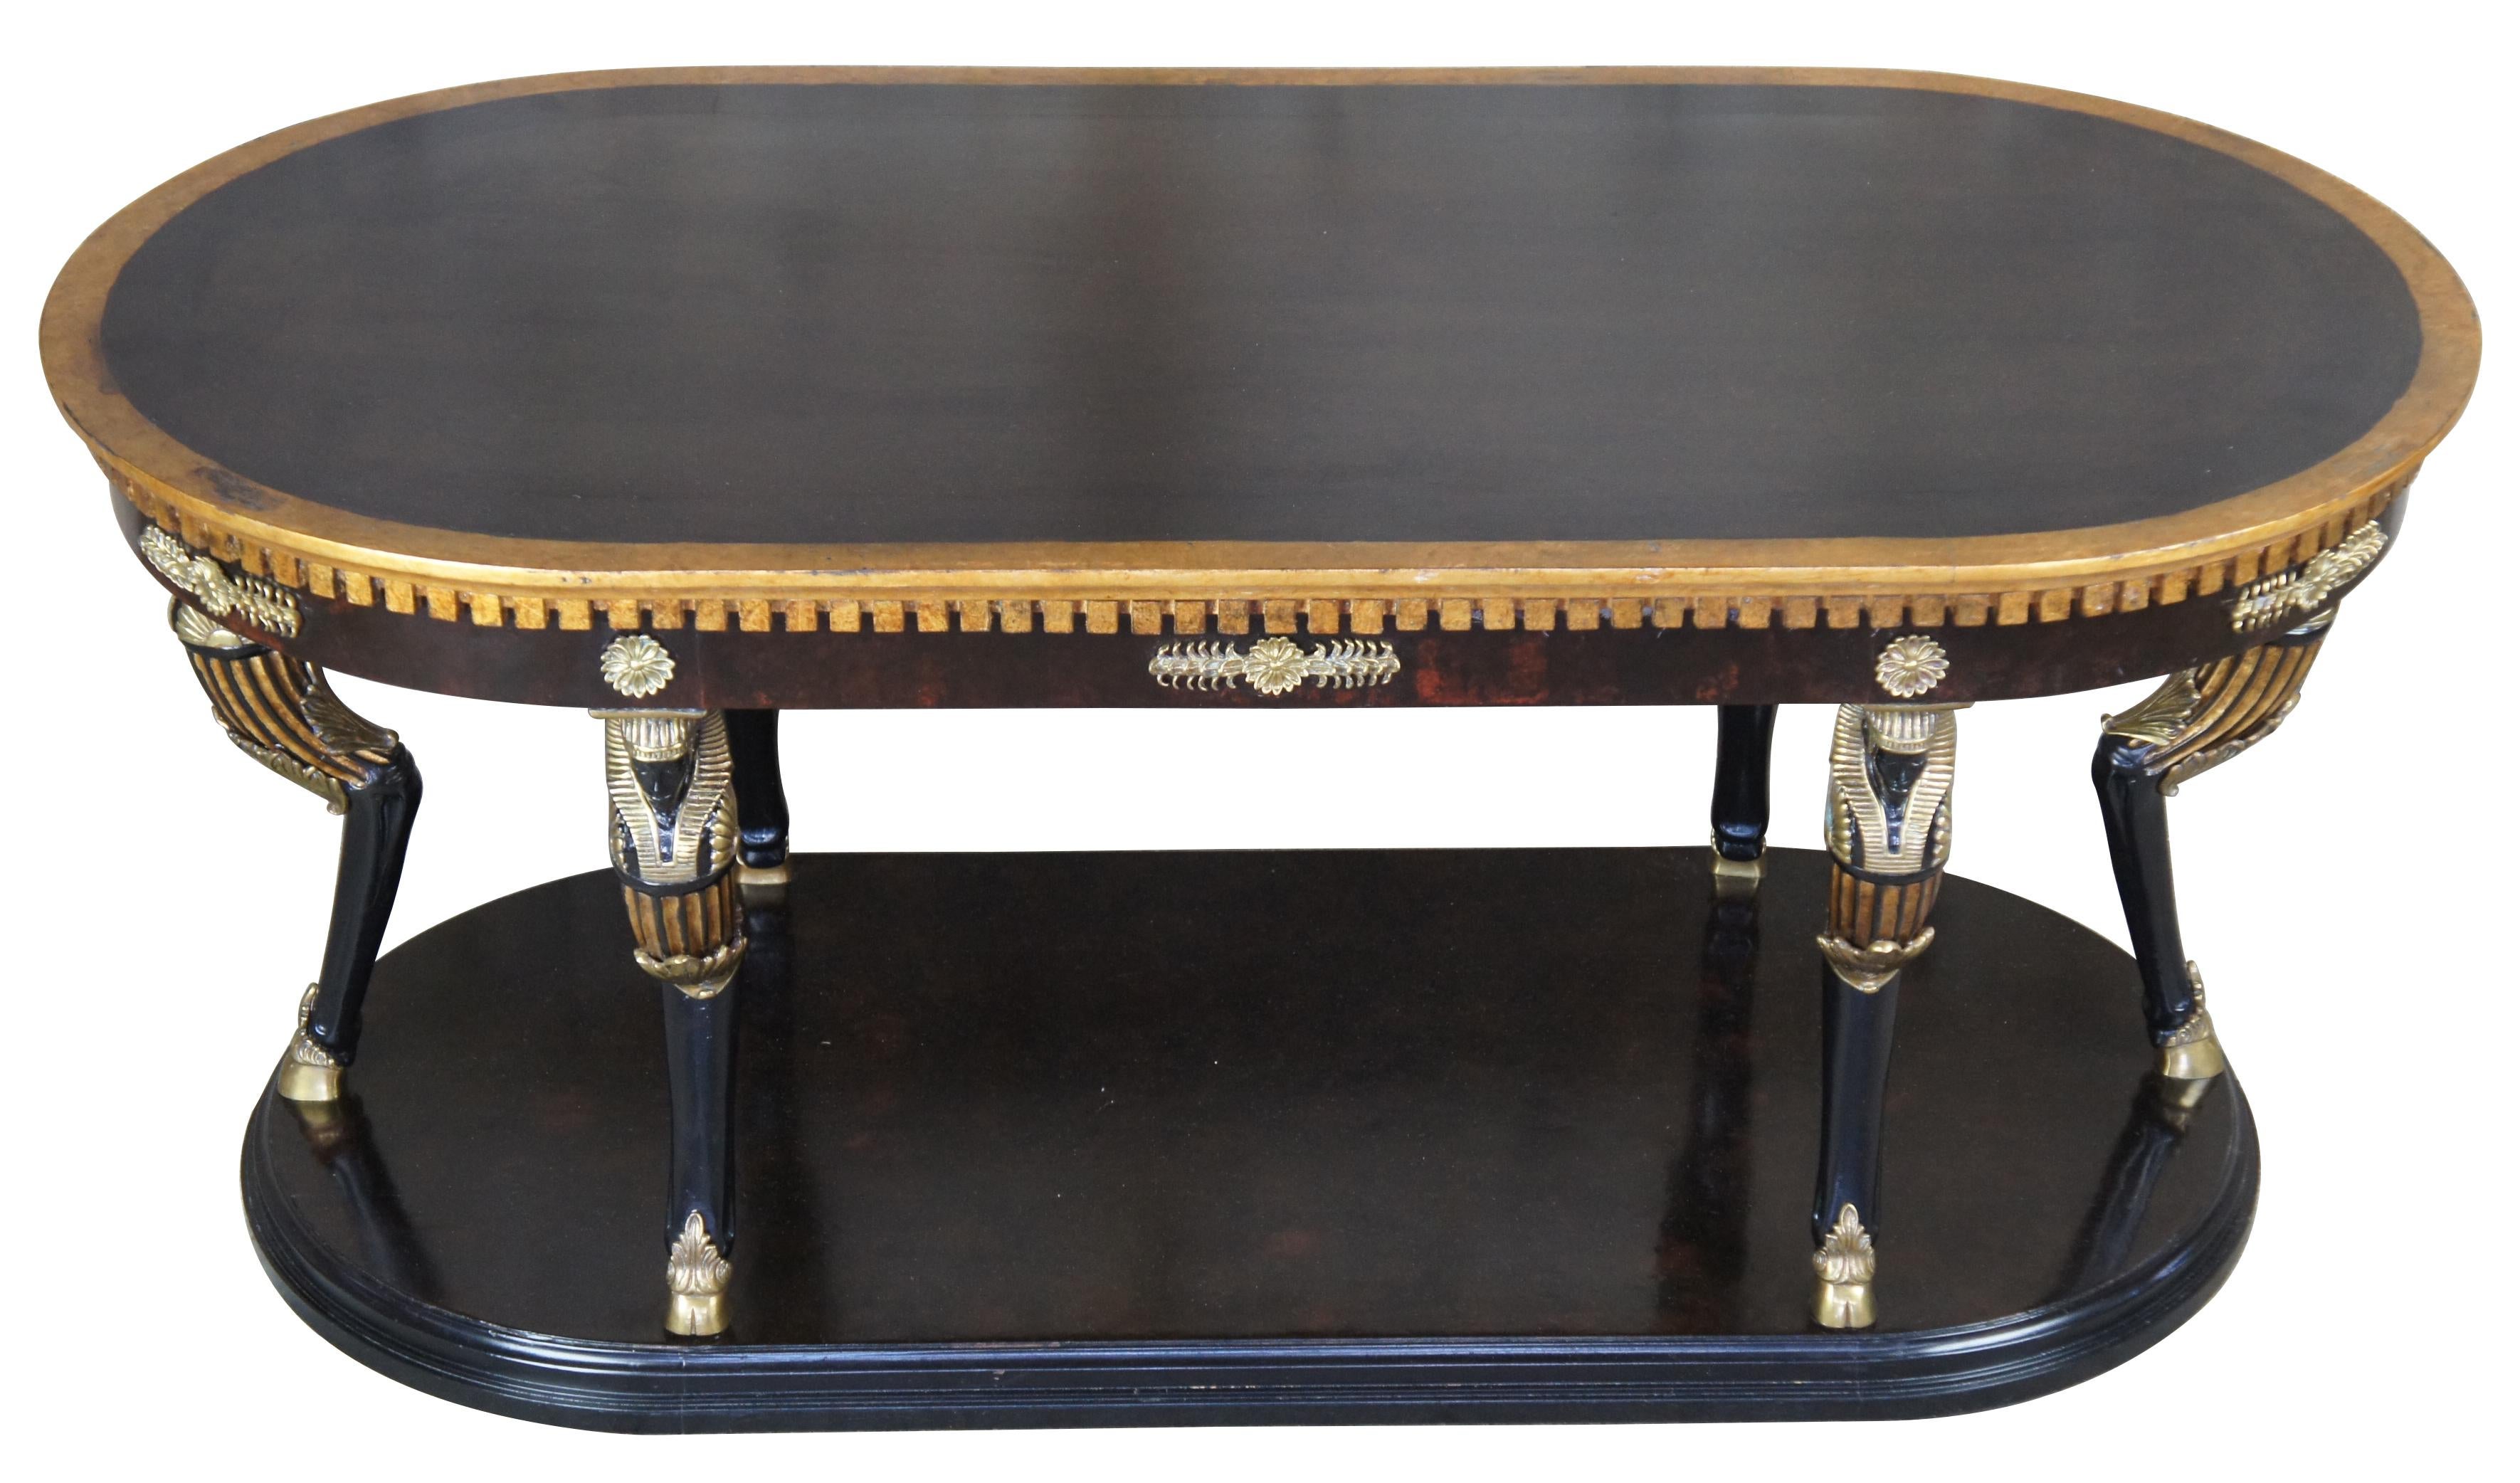 Egyptian Revival Regency oval coffee table neoclassical figural caryatid vintage

Neoclassical or Regency style table. Finished in a dark burl wood with black top. Features architectural design along the apron of the table and brass medallions.